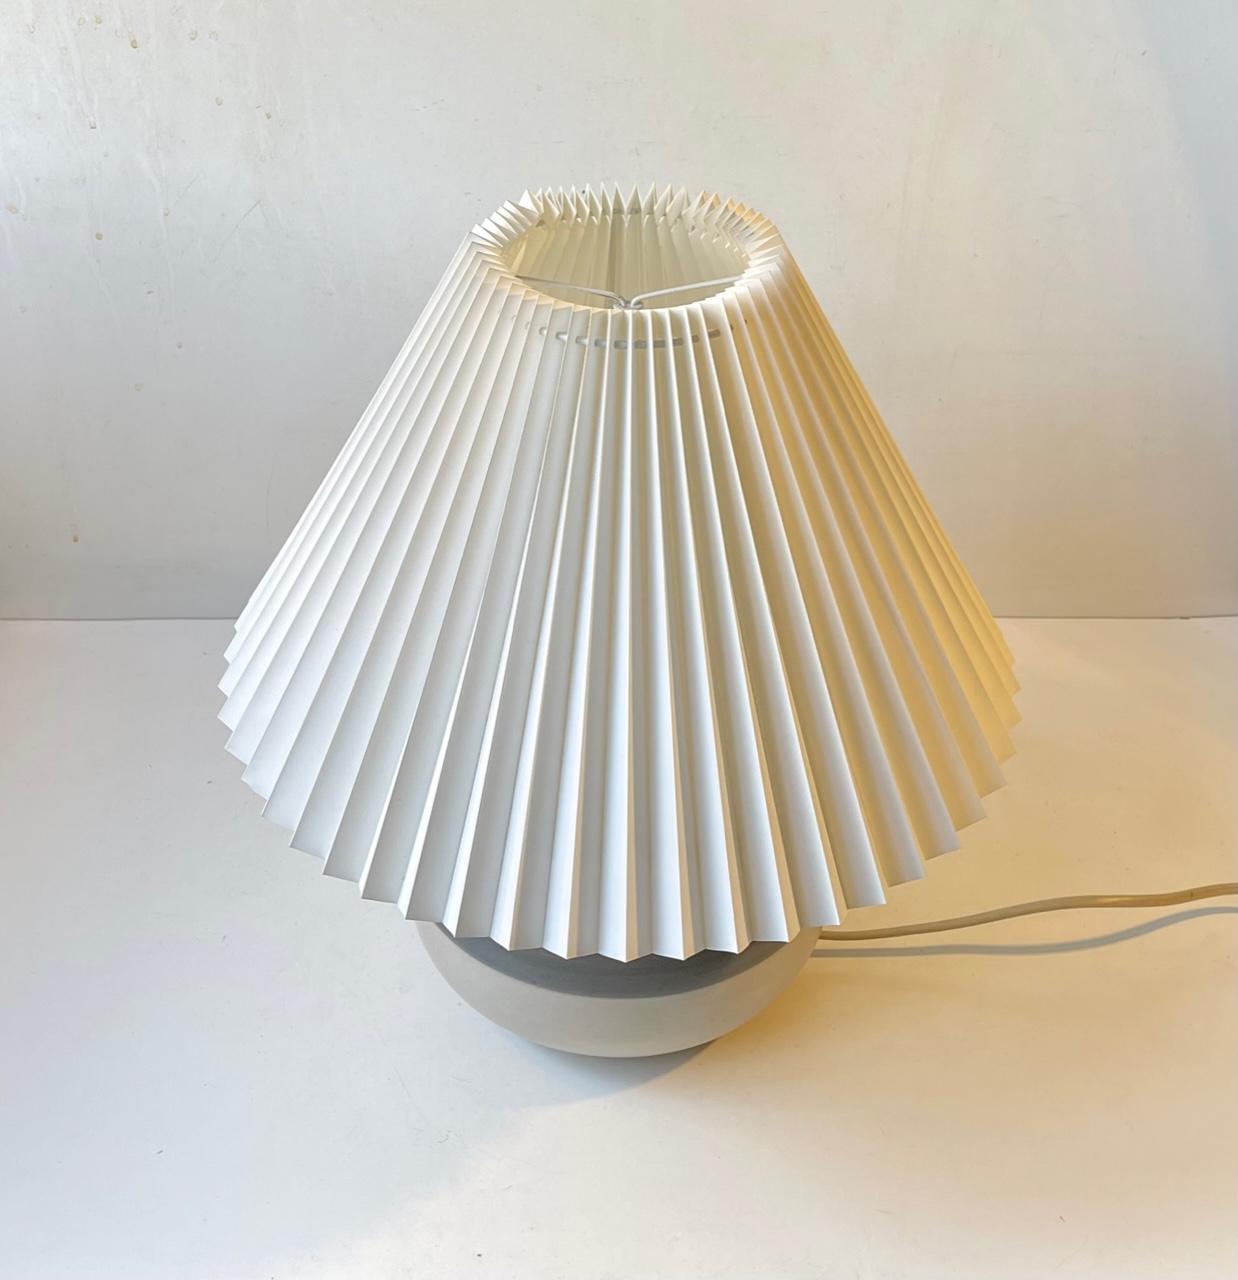 Vintage Danish Stoneware Table Lamp with Stripes by Axella Design, 1970s 1